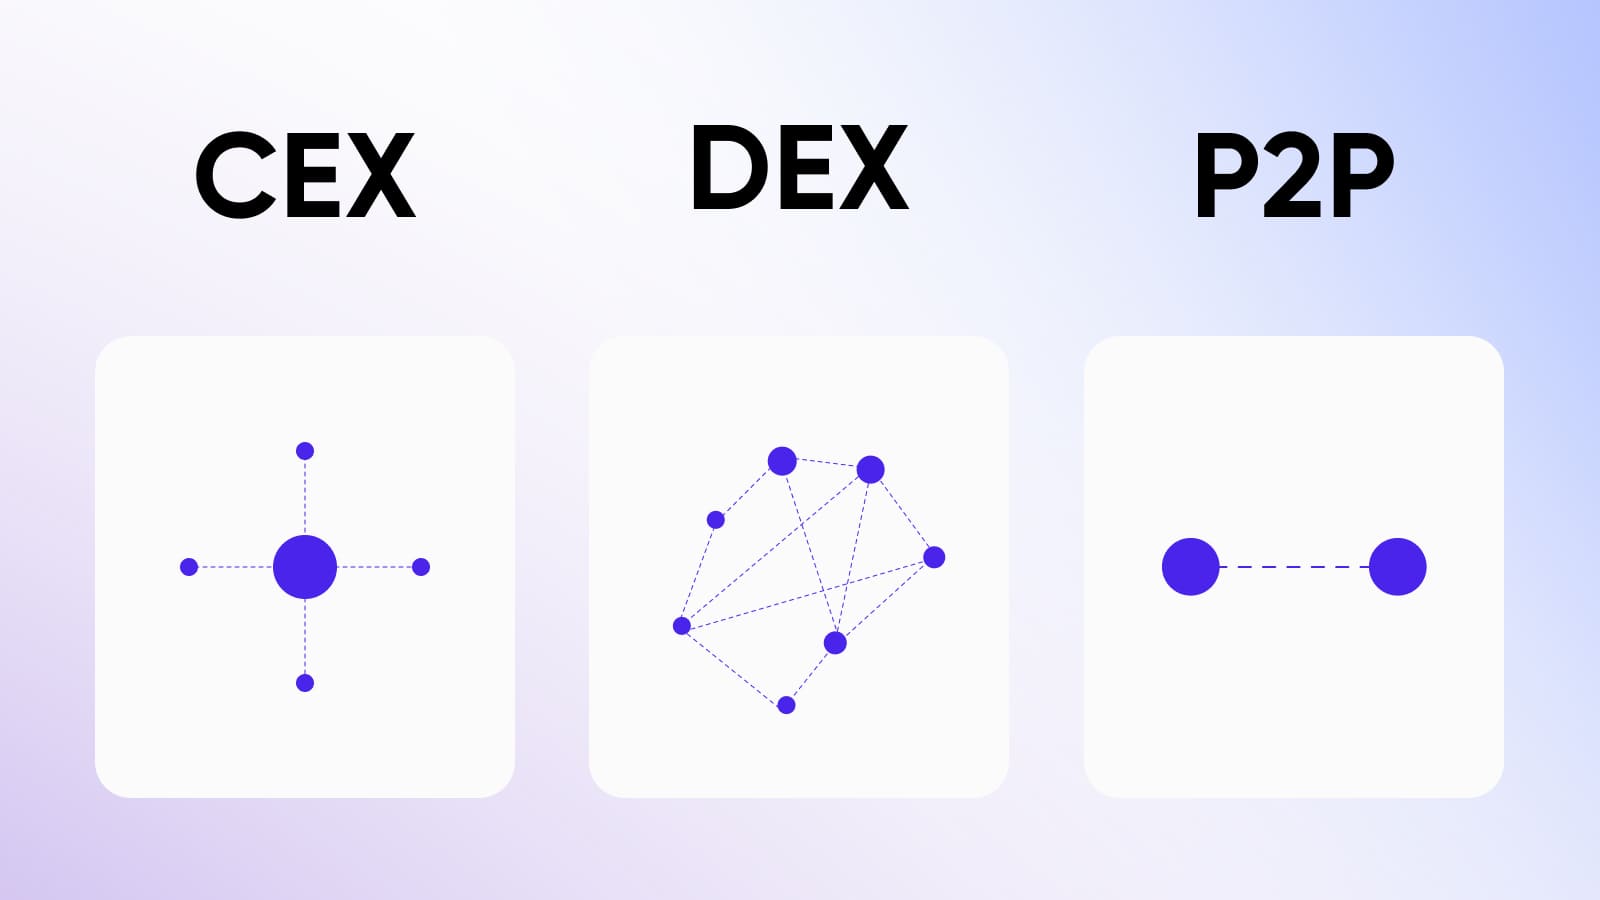 There are several types of exchanges on the market: centralized, decentralized and peer-to-peer.